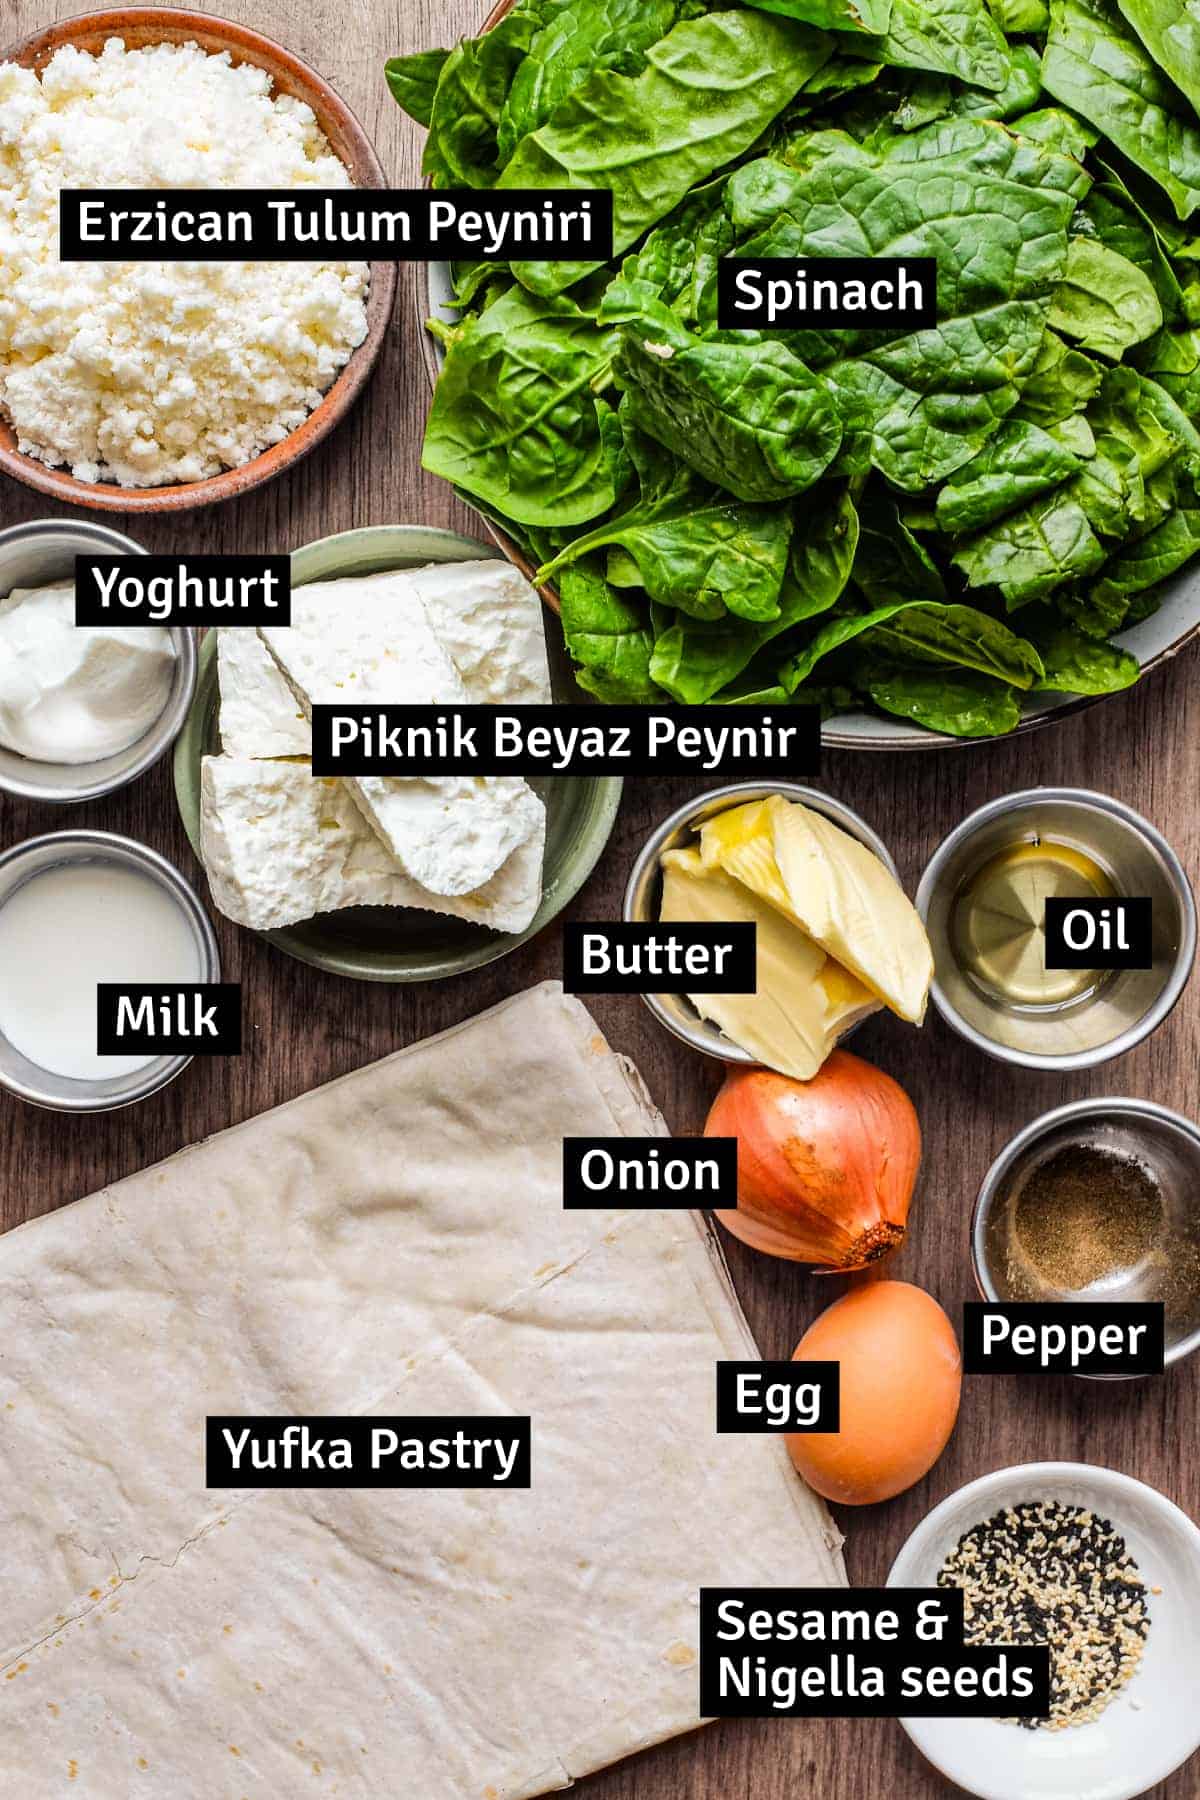 The ingredients for a Turkish cheese börek pie with cheese and spinach: two types of Turkish cheese, yufka pastry, spinach and more.